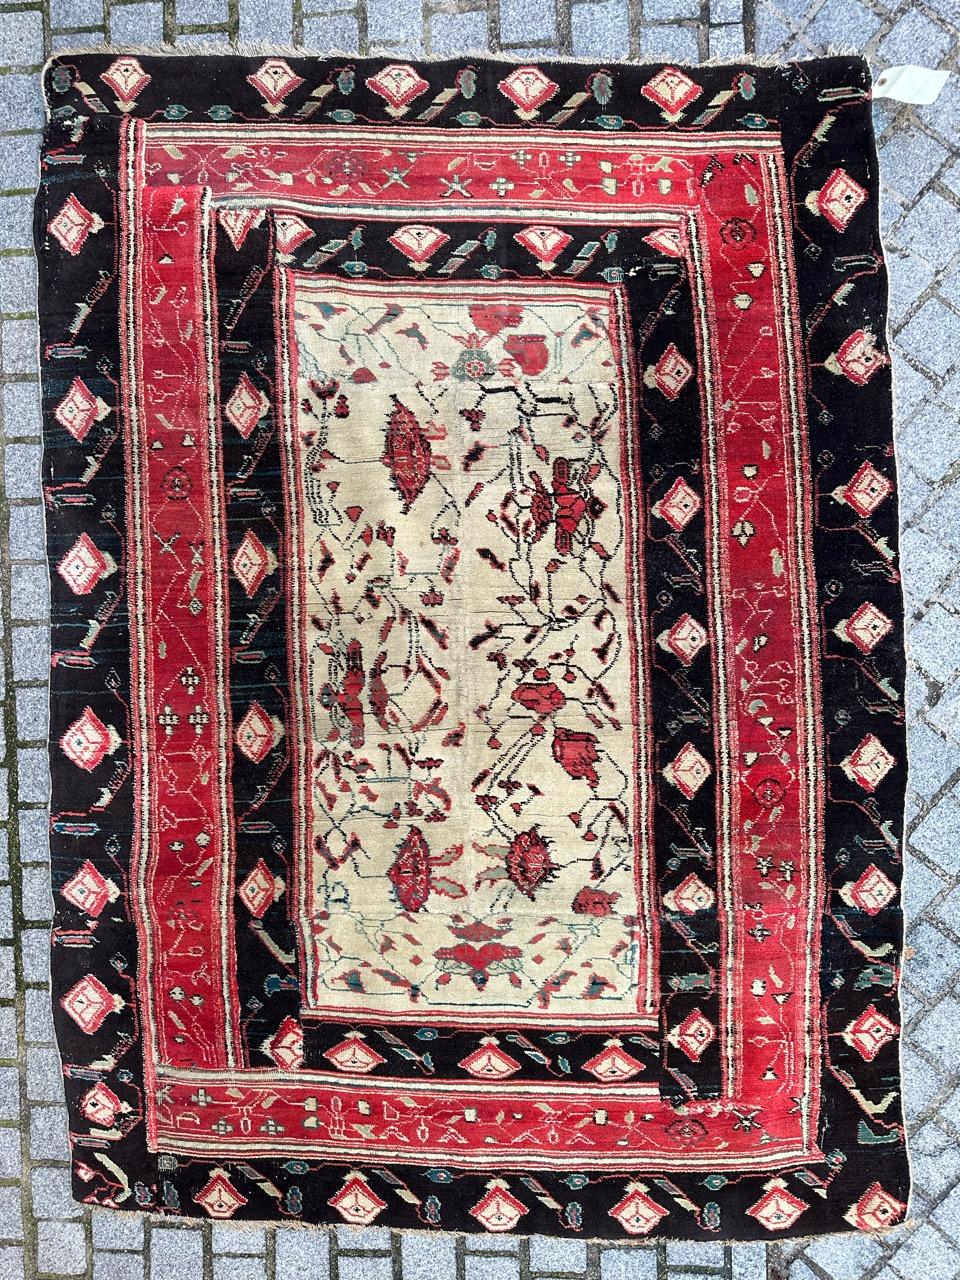 Exquisite antique Indian Agra rug from the mid-19th century. This masterpiece is entirely hand-knotted with wool on a cotton base, featuring a decorative design on a white background adorned with stylized red floral patterns. The red and black